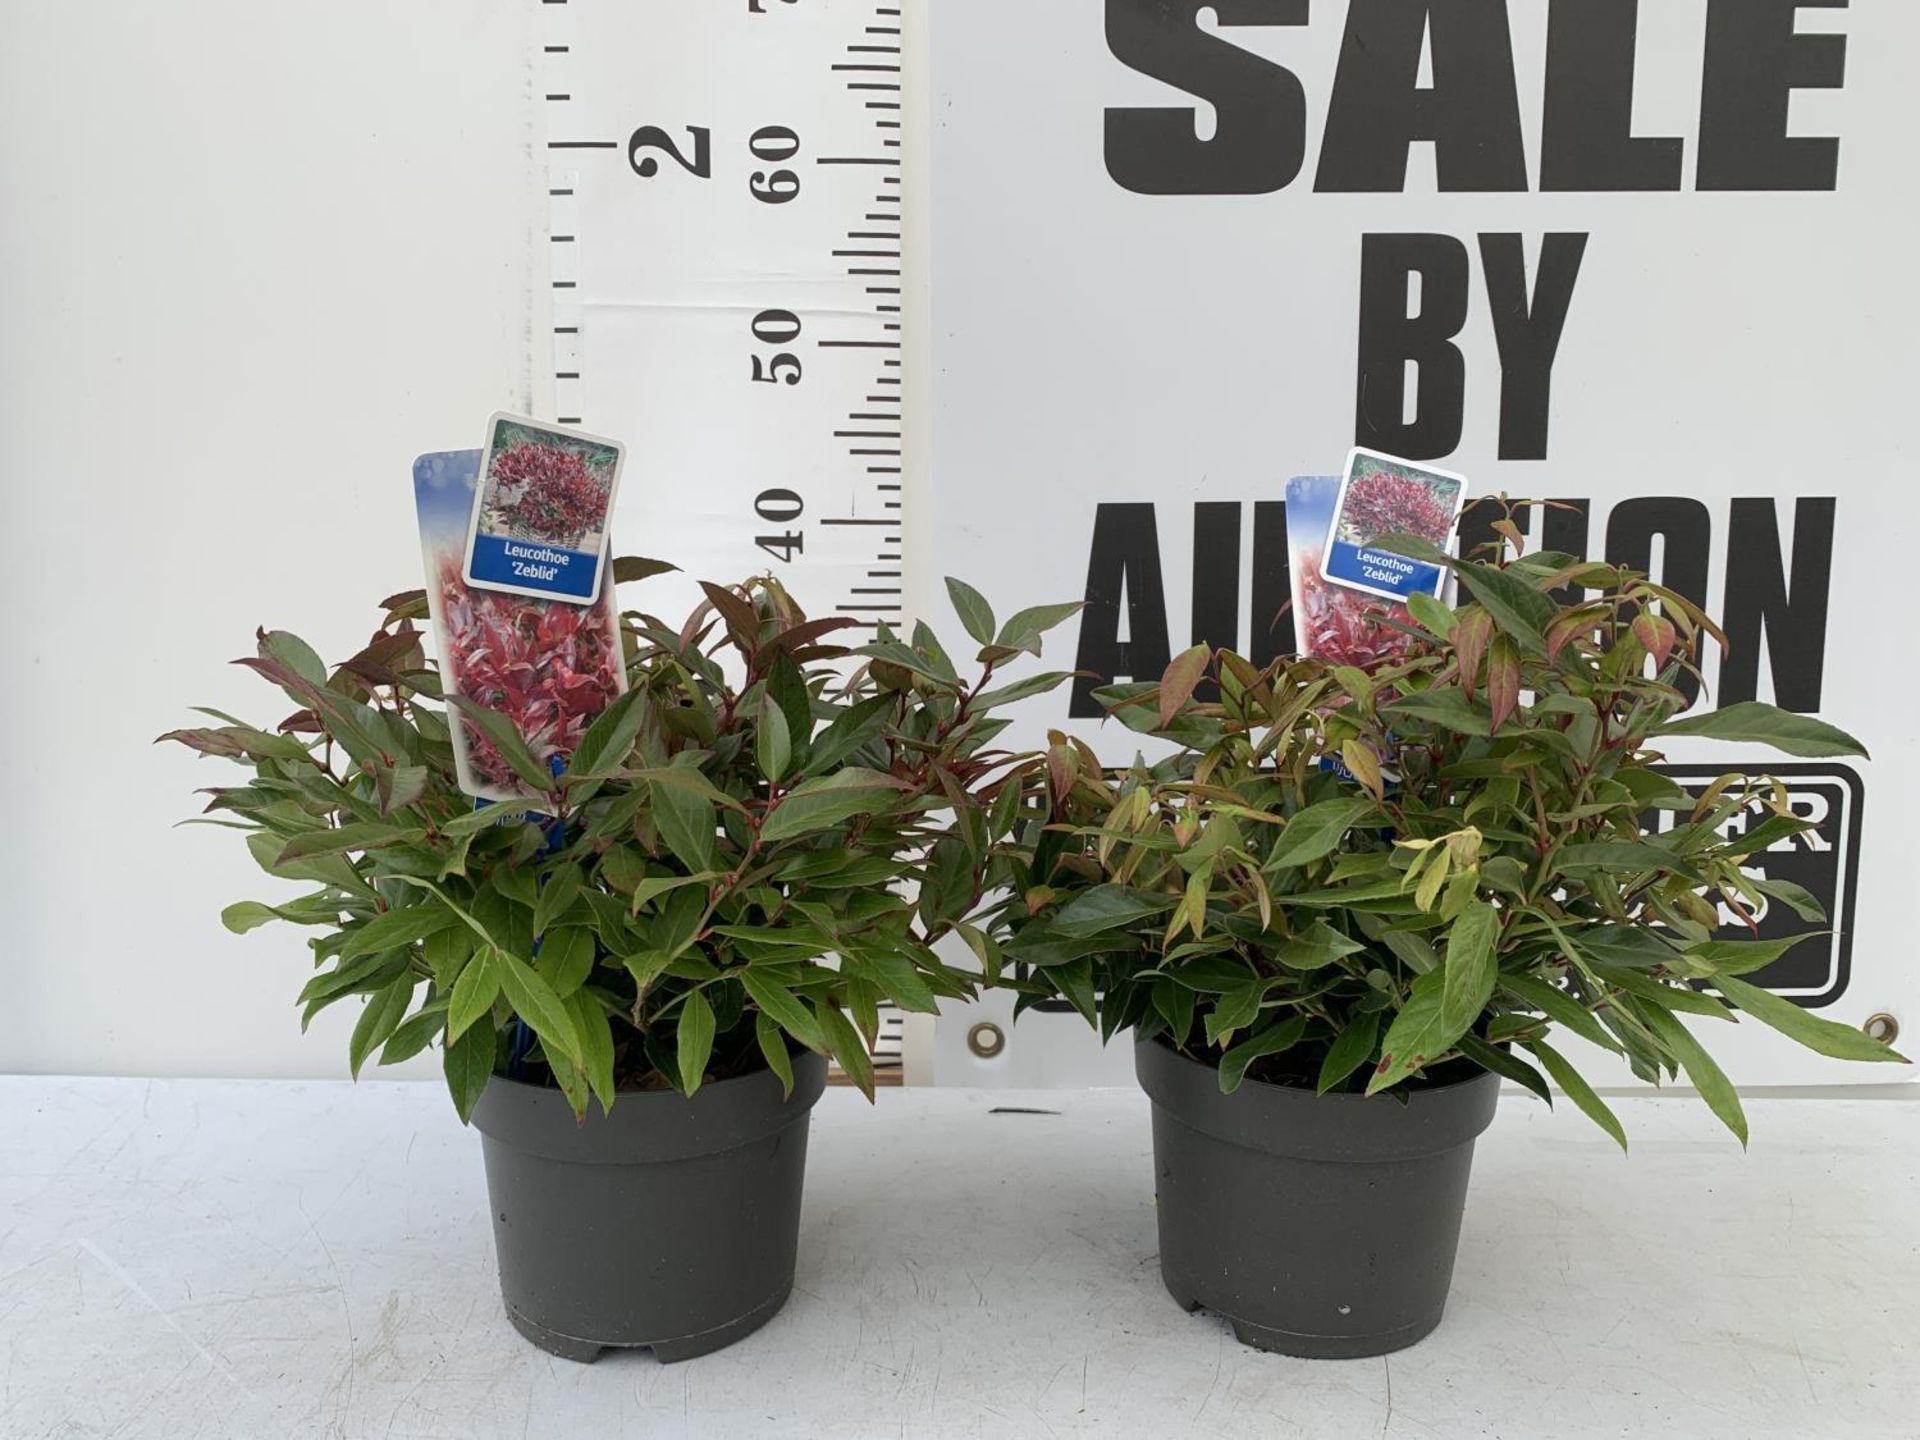 TWO LEUCOTHOE 'ZEBLID' APPROX 40CM IN HEIGHT IN 2LTR POTS PLUS VAT TO BE SOLD FOR THE TWO